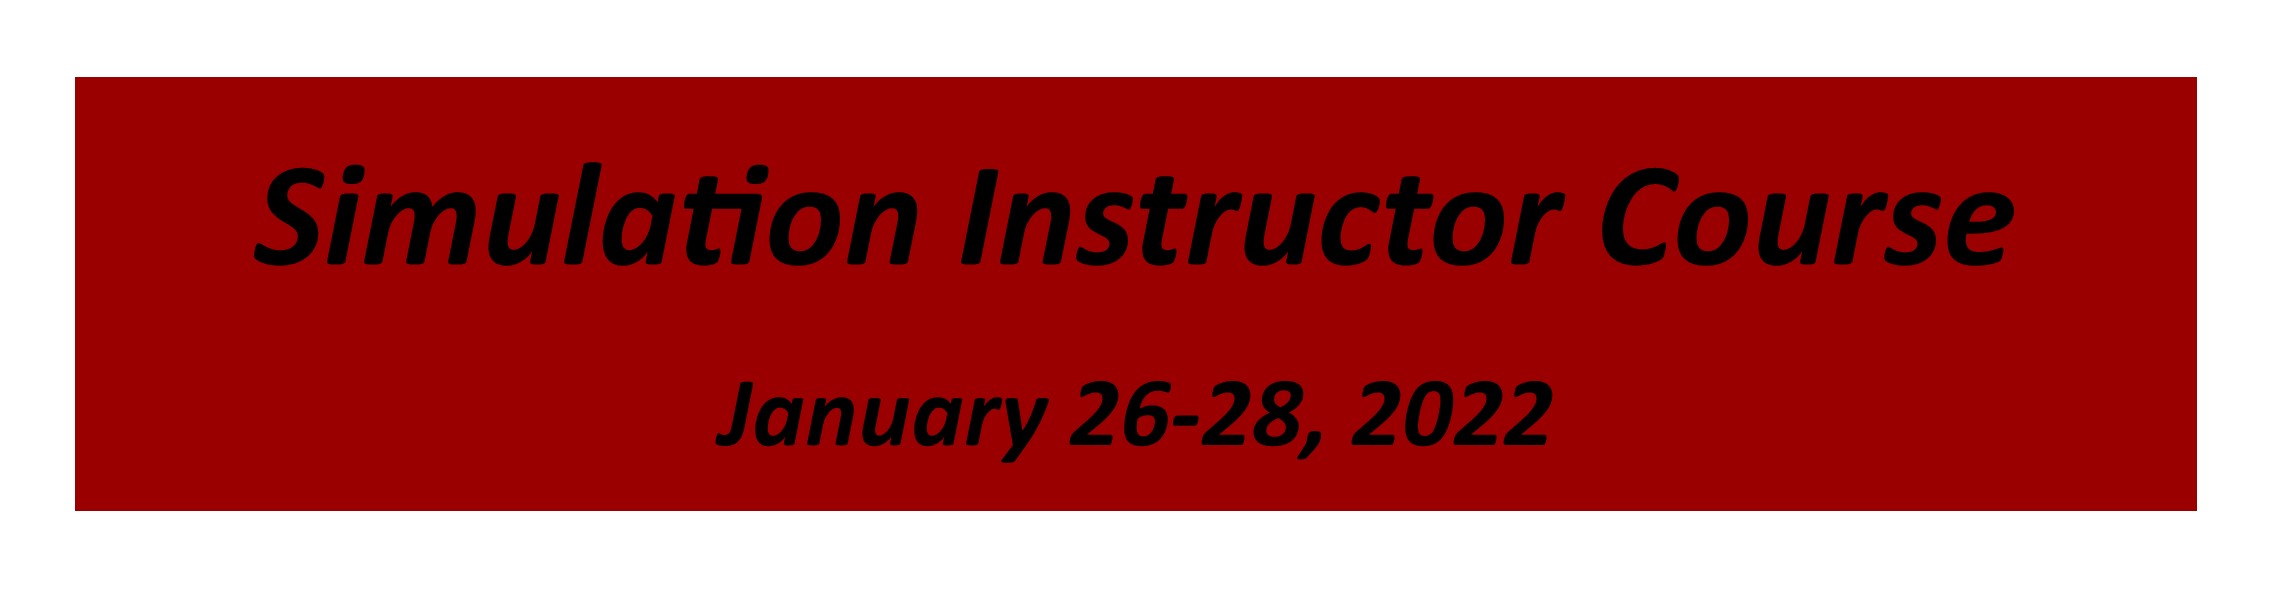 Simulation Instructor Course Banner